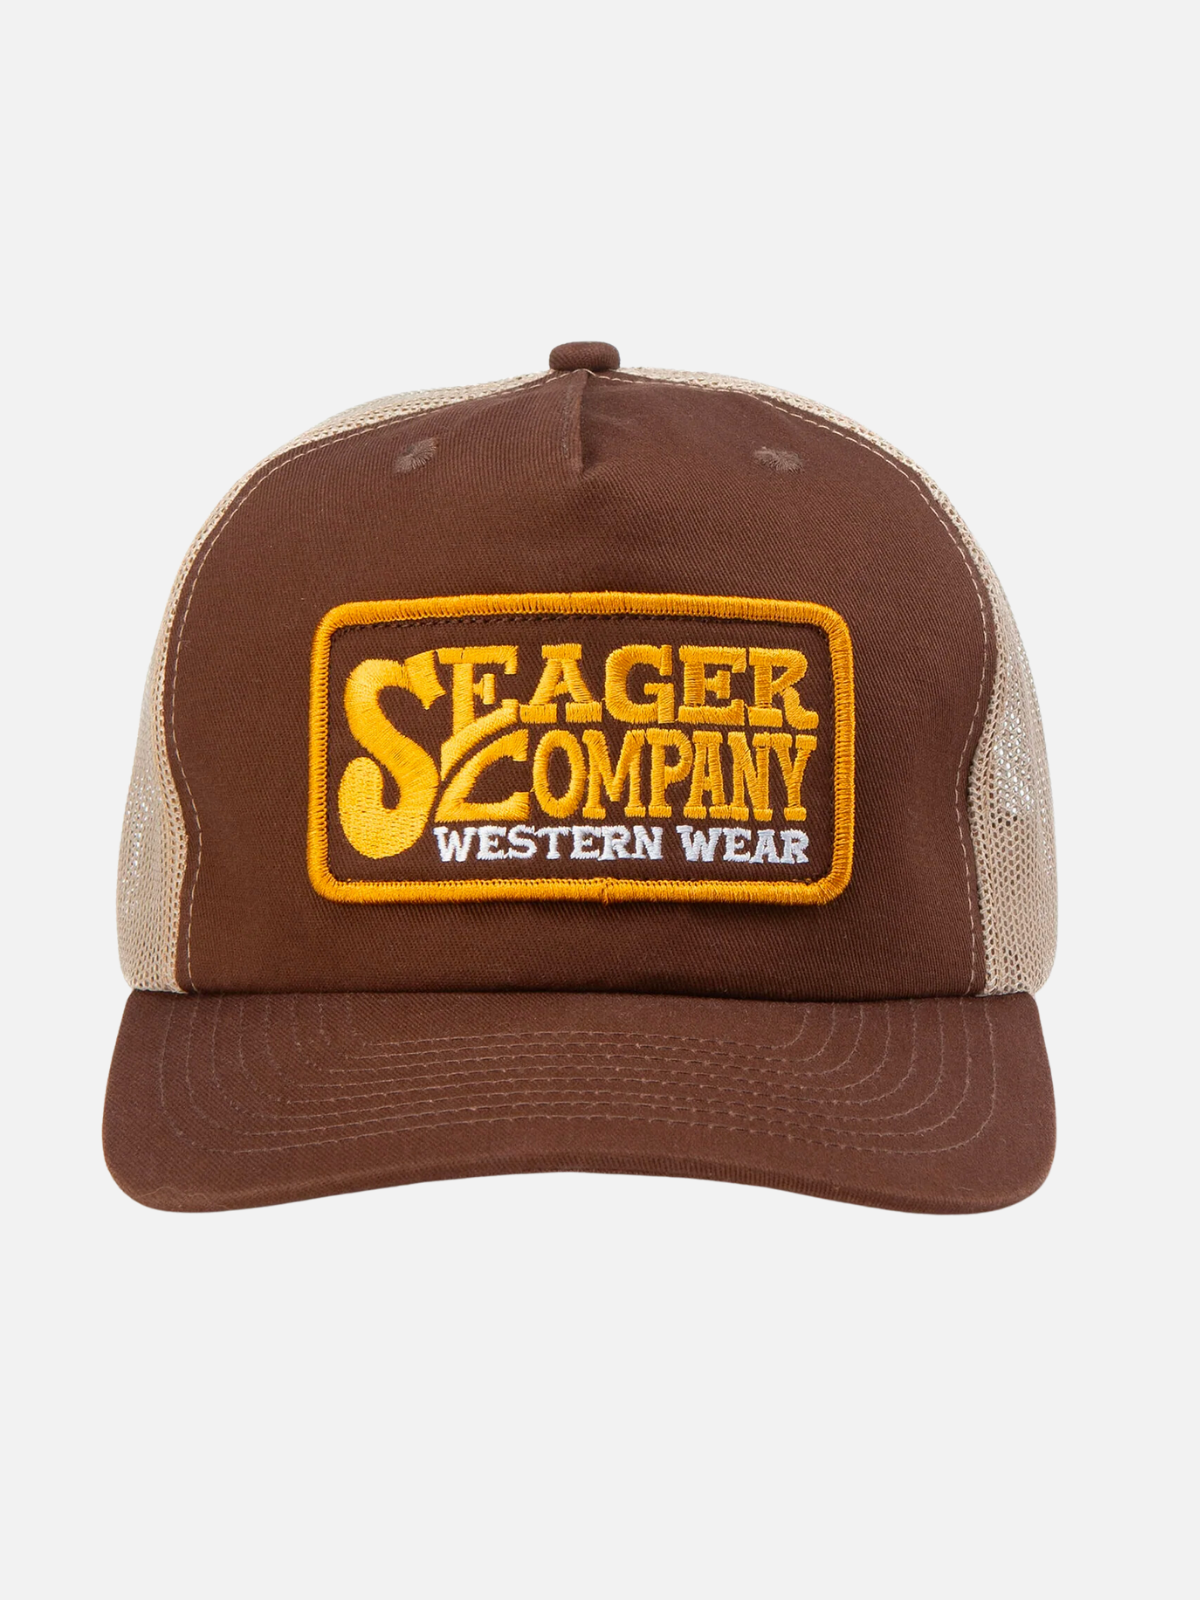 seager buckys trucker snapback cotton canvas mesh backing hat brown tan gold yellow white brand patch kempt athens ga georgia men's clothing store